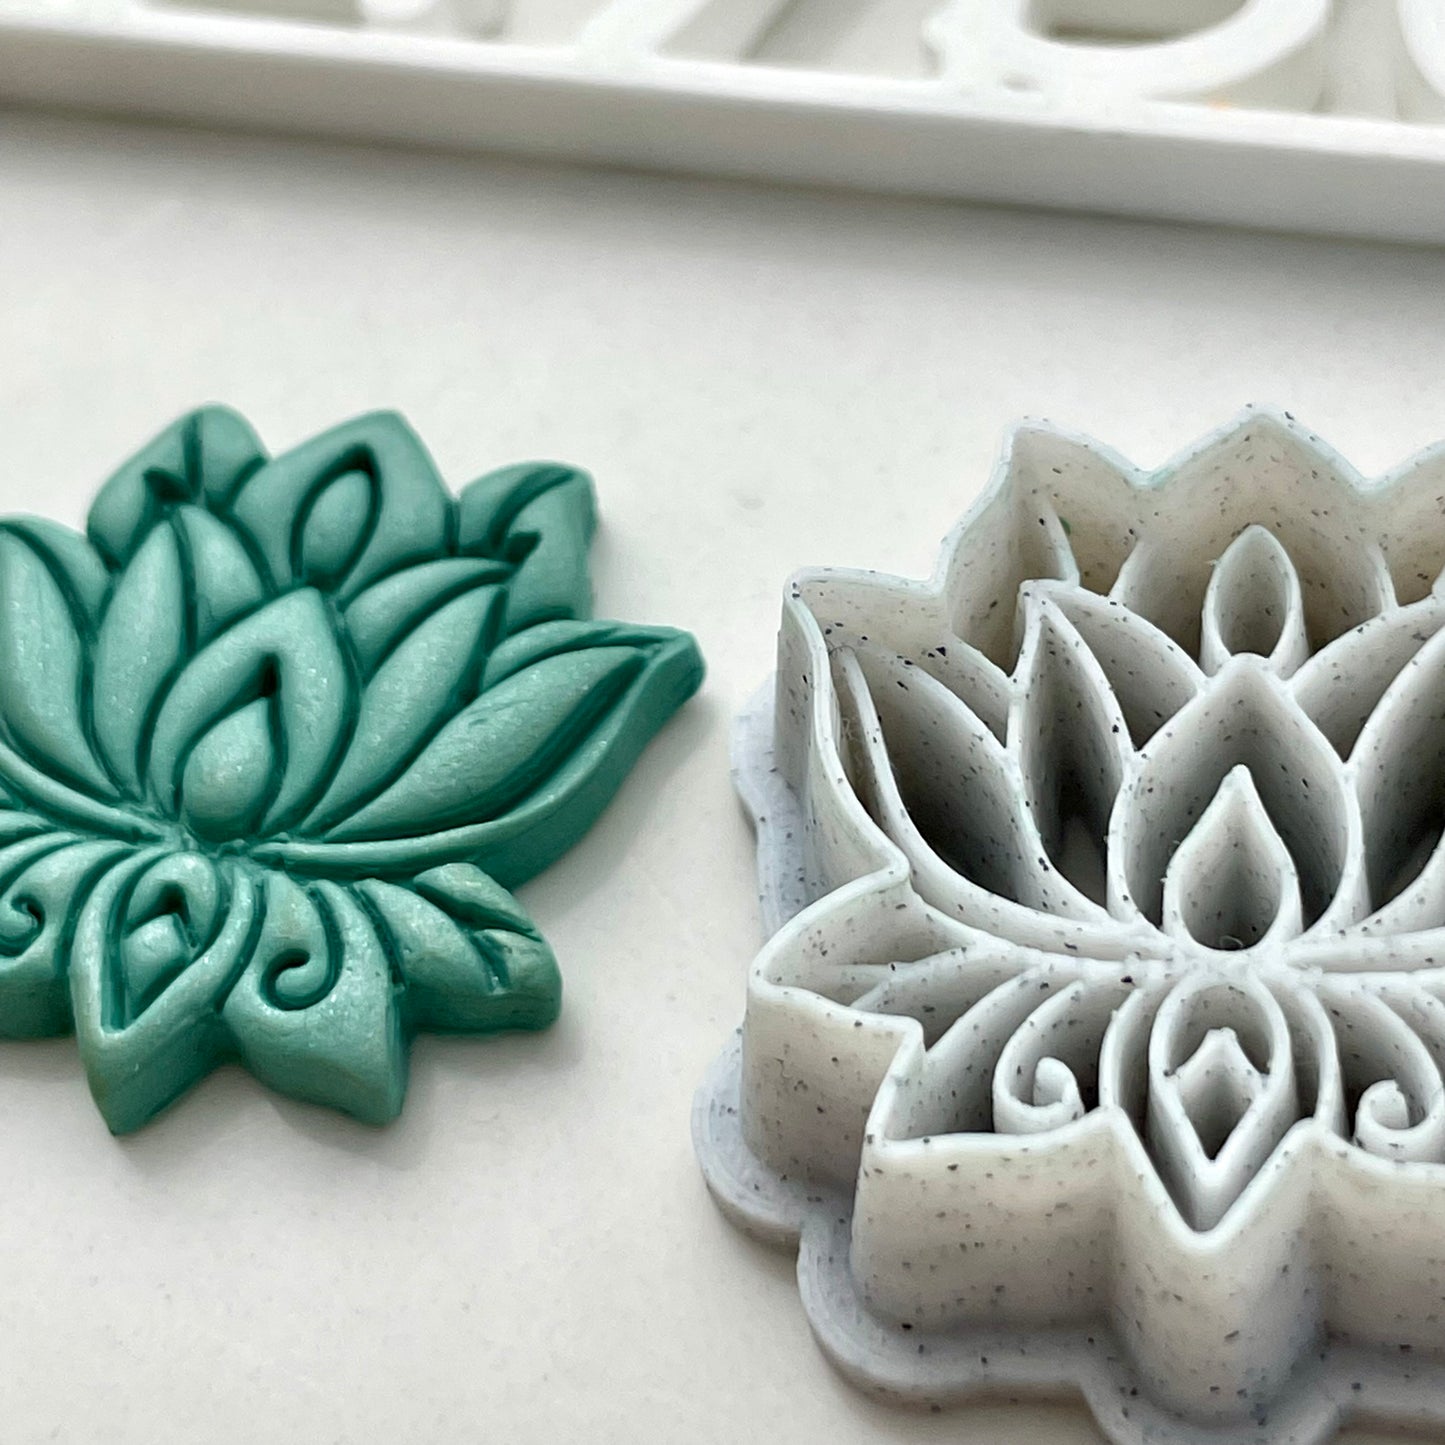 Lotus combined stamp/cutter